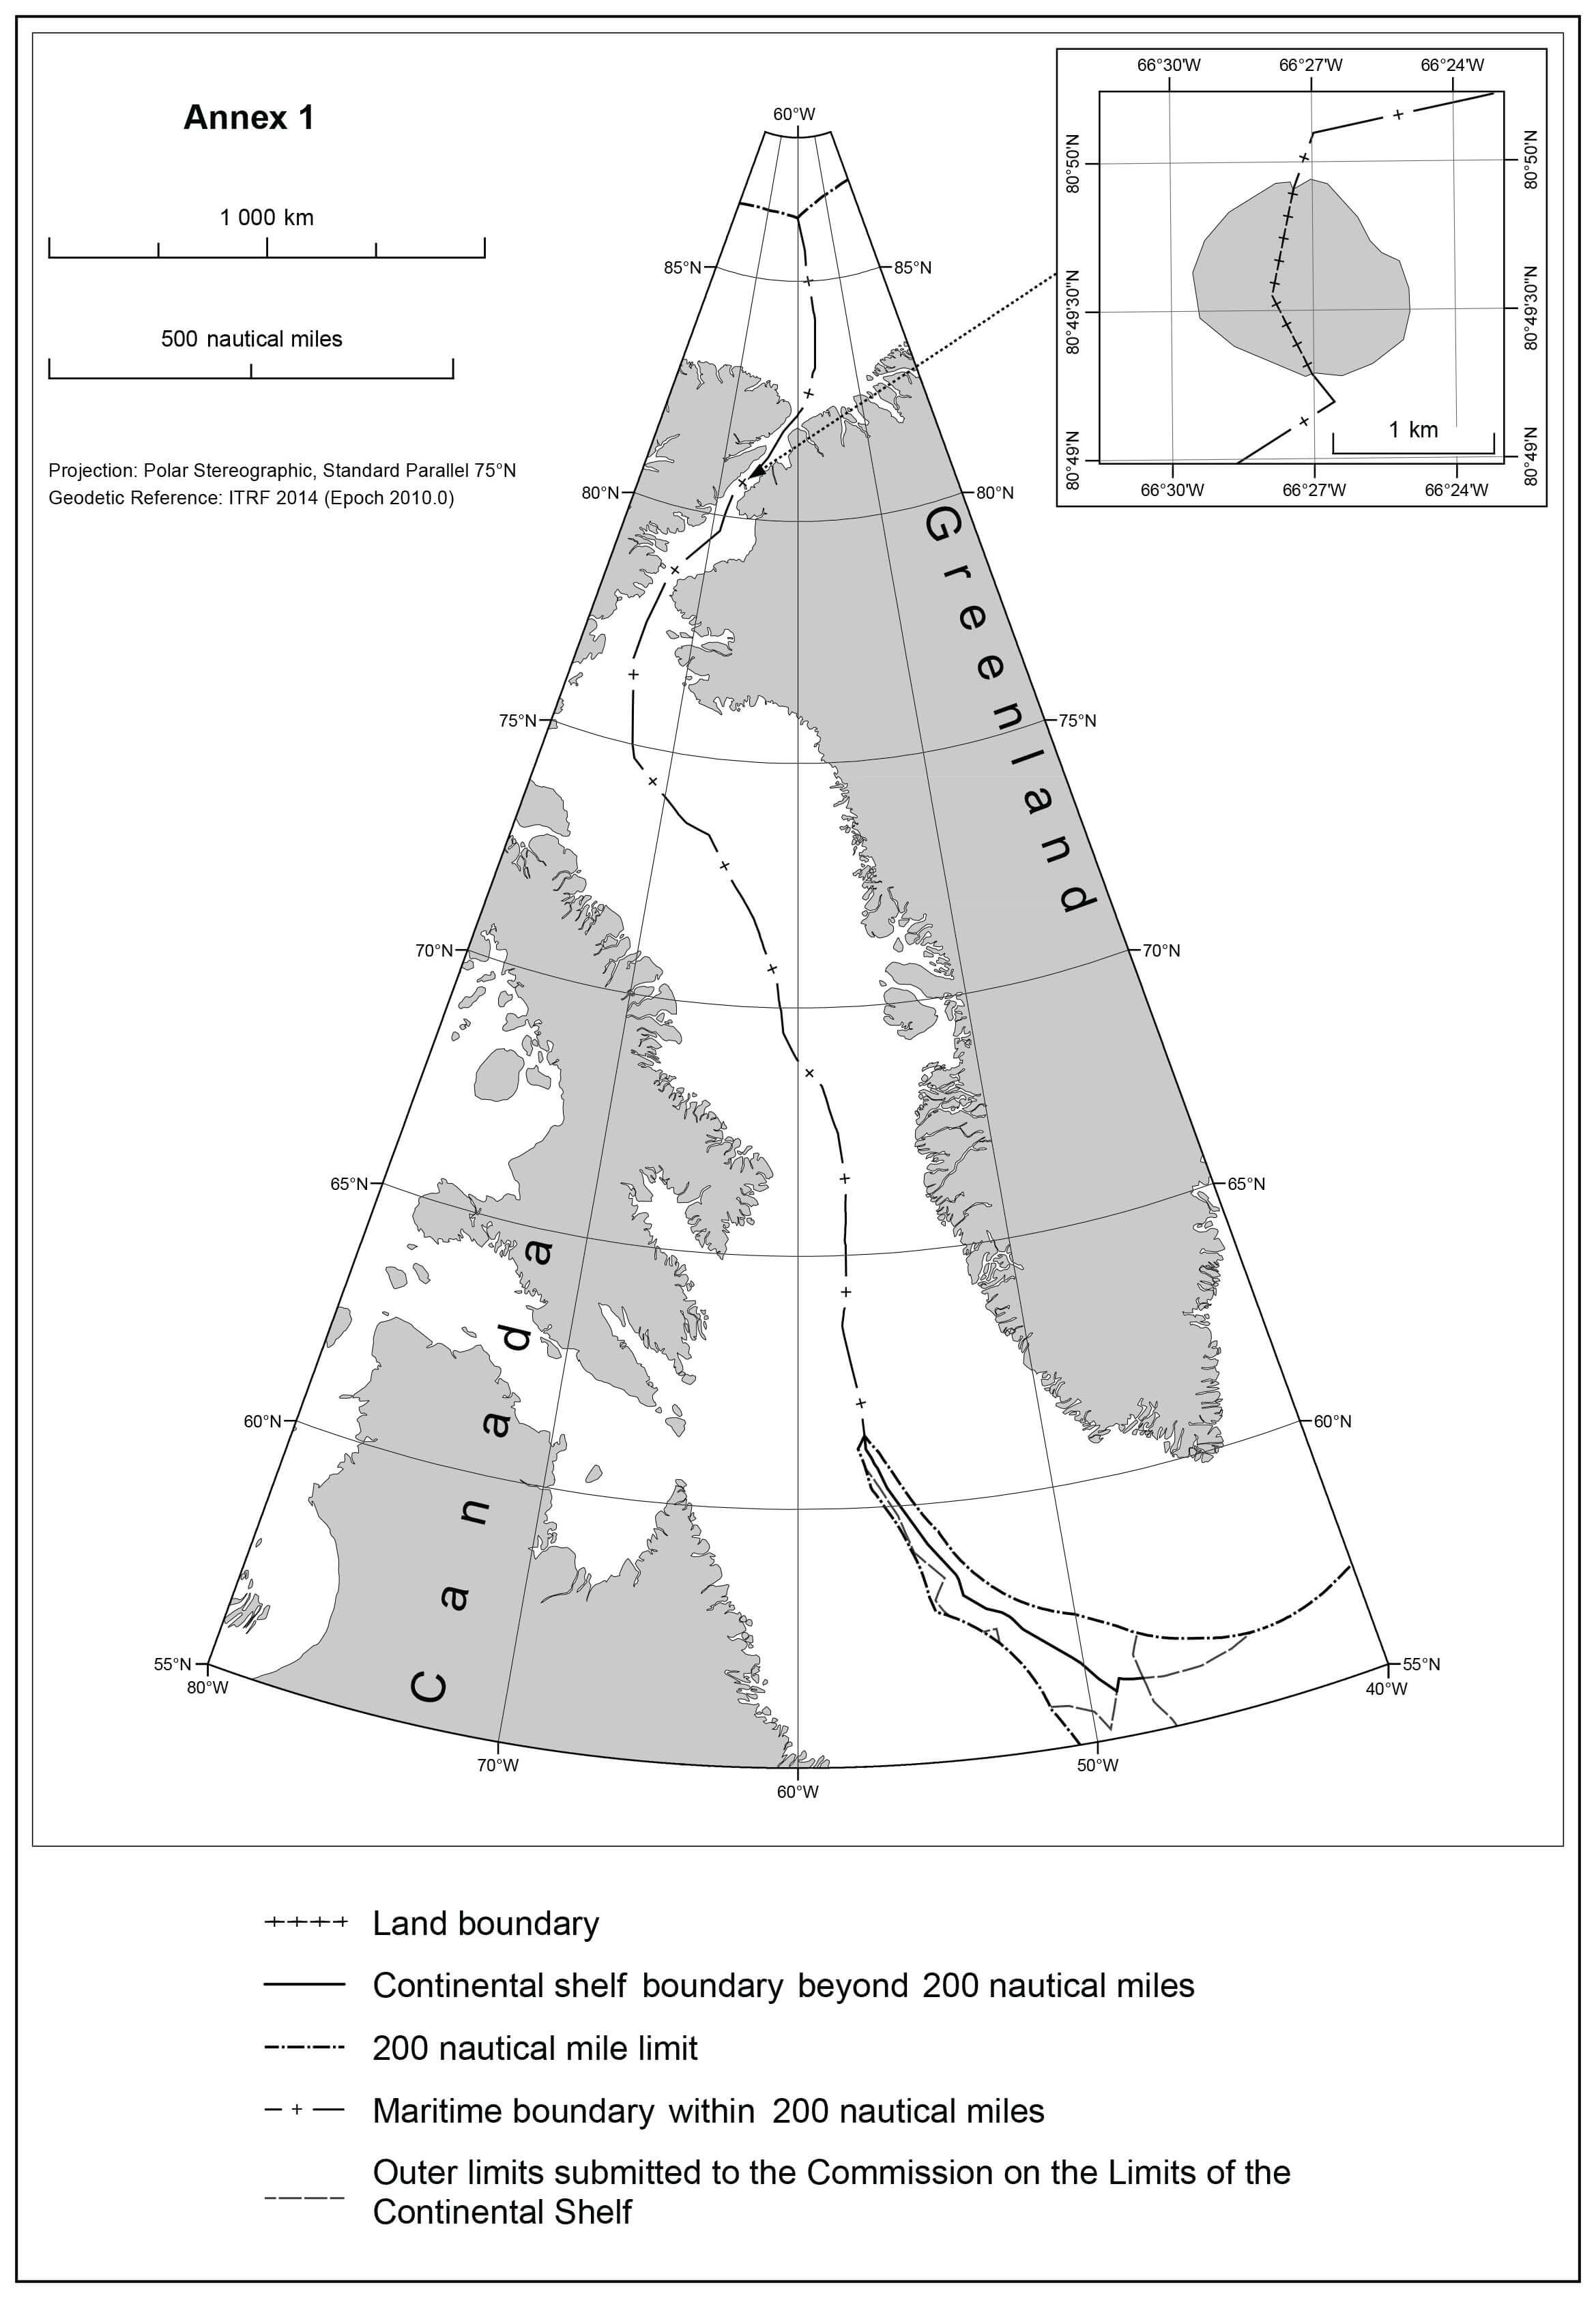 Map showing land boundary for Tartupaluk/Hans Island and maritime boundary within 200 nautical miles, including the Lincoln Sea.